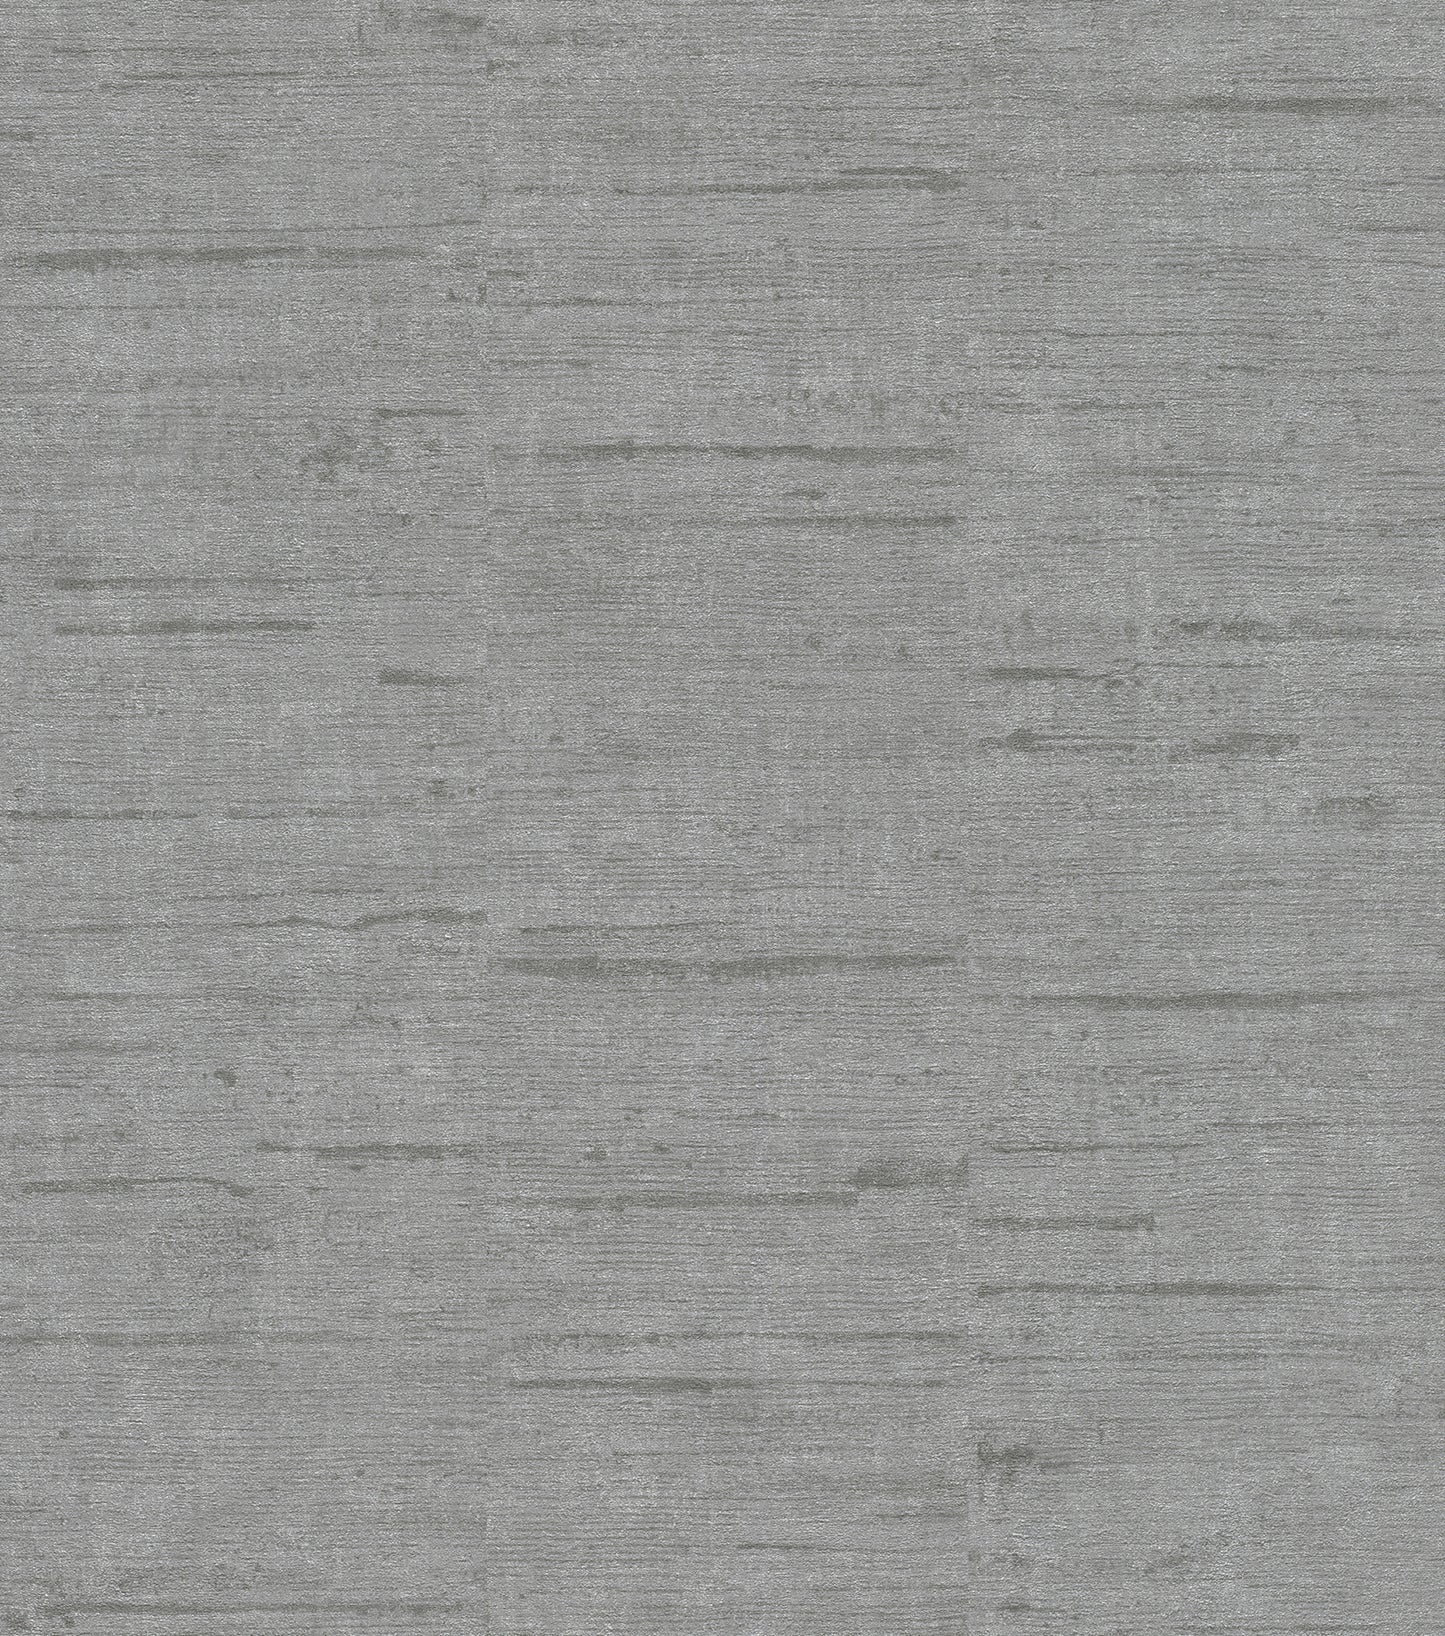 Looking 4015-426731 Beyond Textures Maclure Silver Striated Texture Silver by Advantage